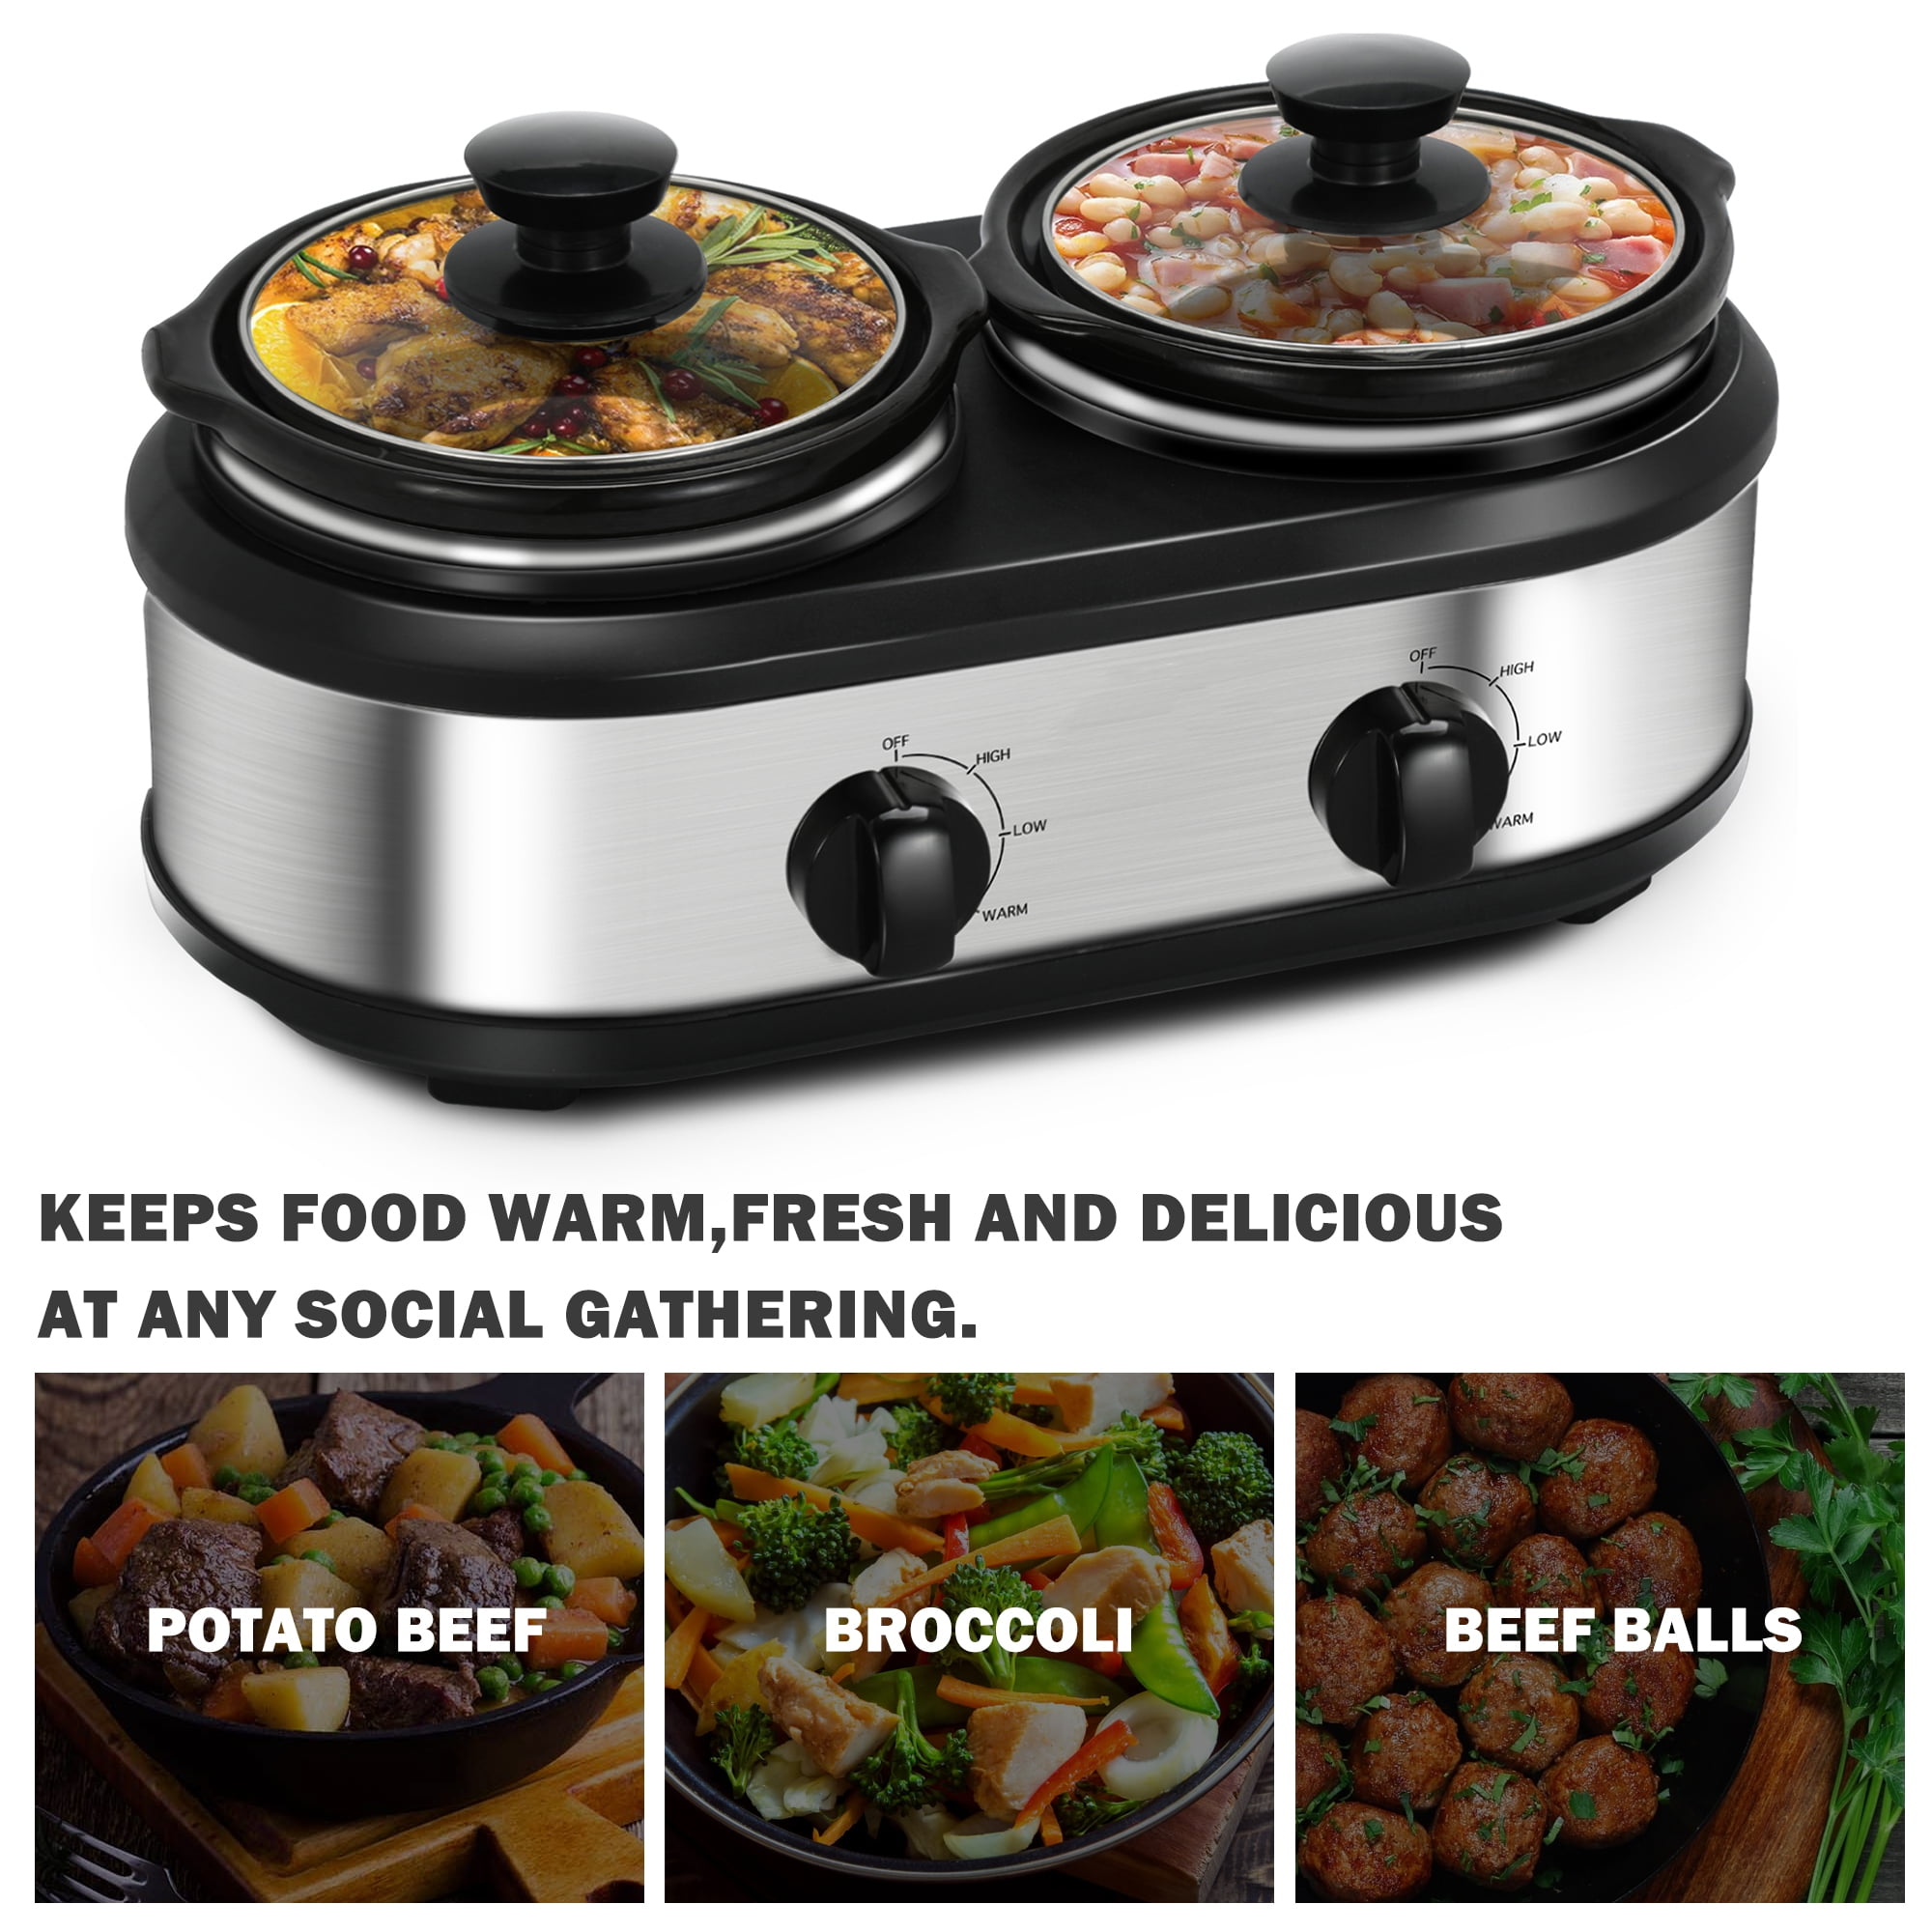 Crock-Pot, Kitchen, New Crockpot Electric Lunch Box Portable Food Warmer  For Onthego 2ounce